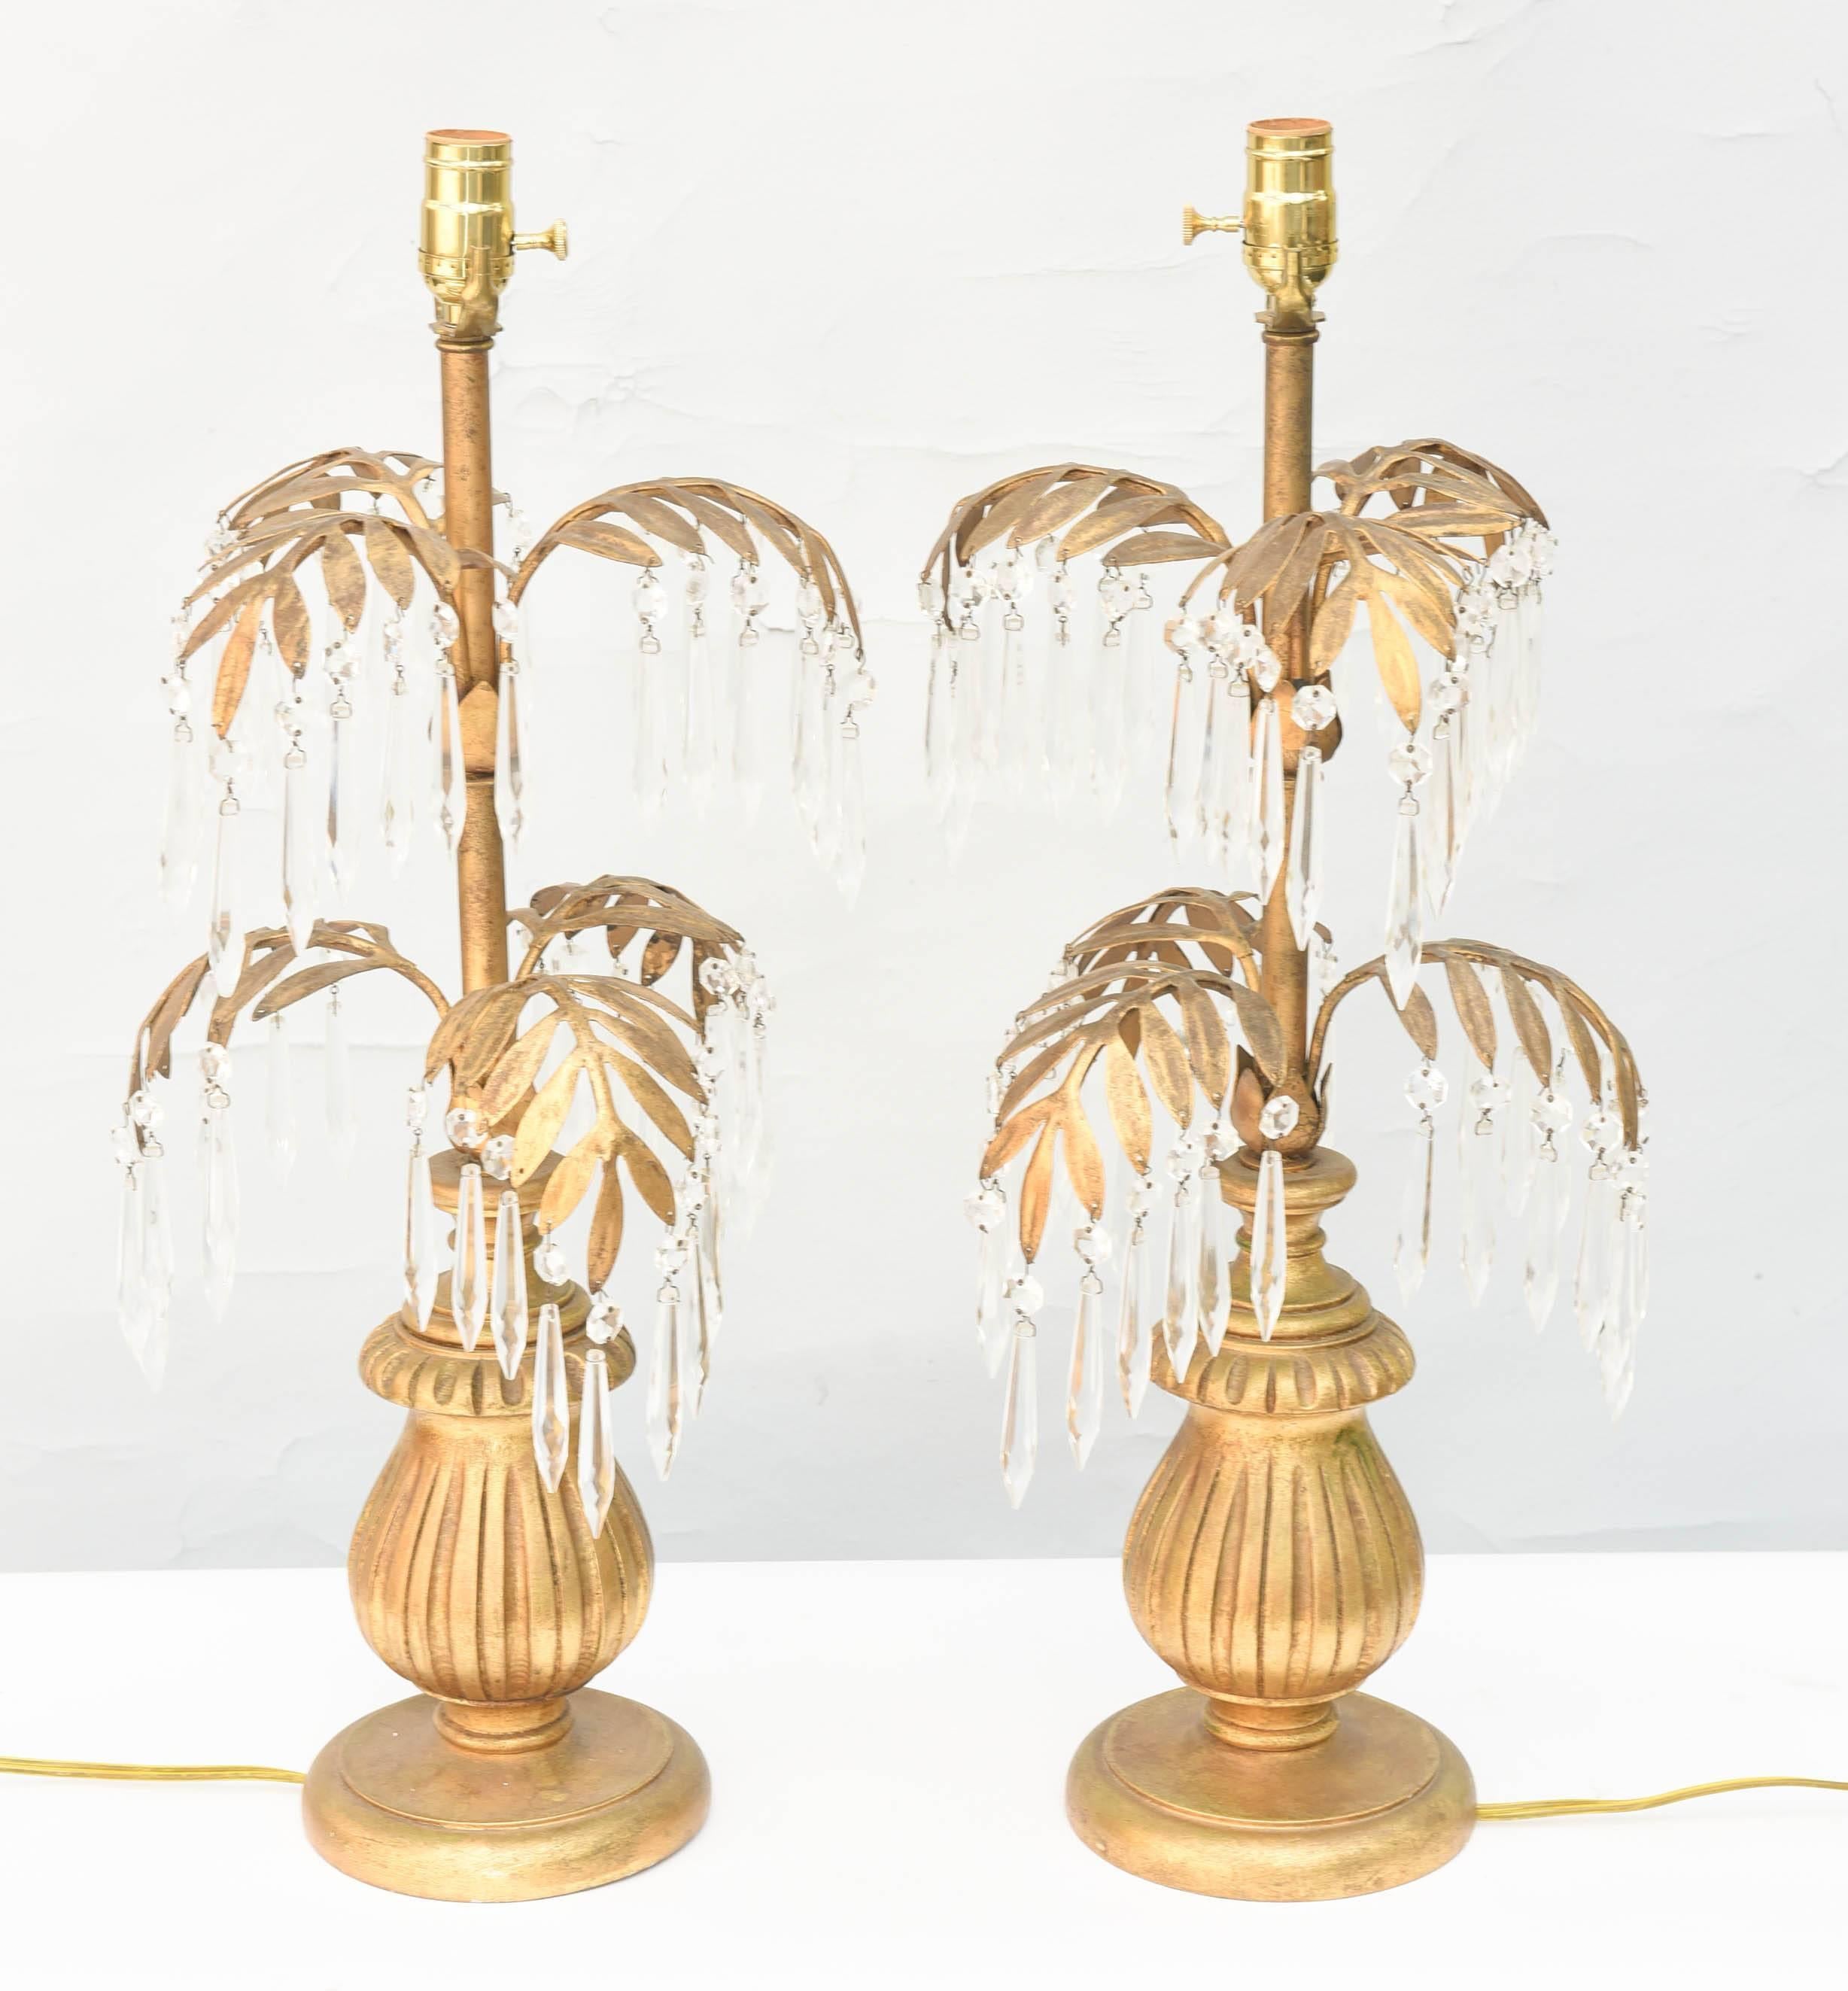 20th Century Pair of Gilt Metal Palm Lamps Decorated with Crystals